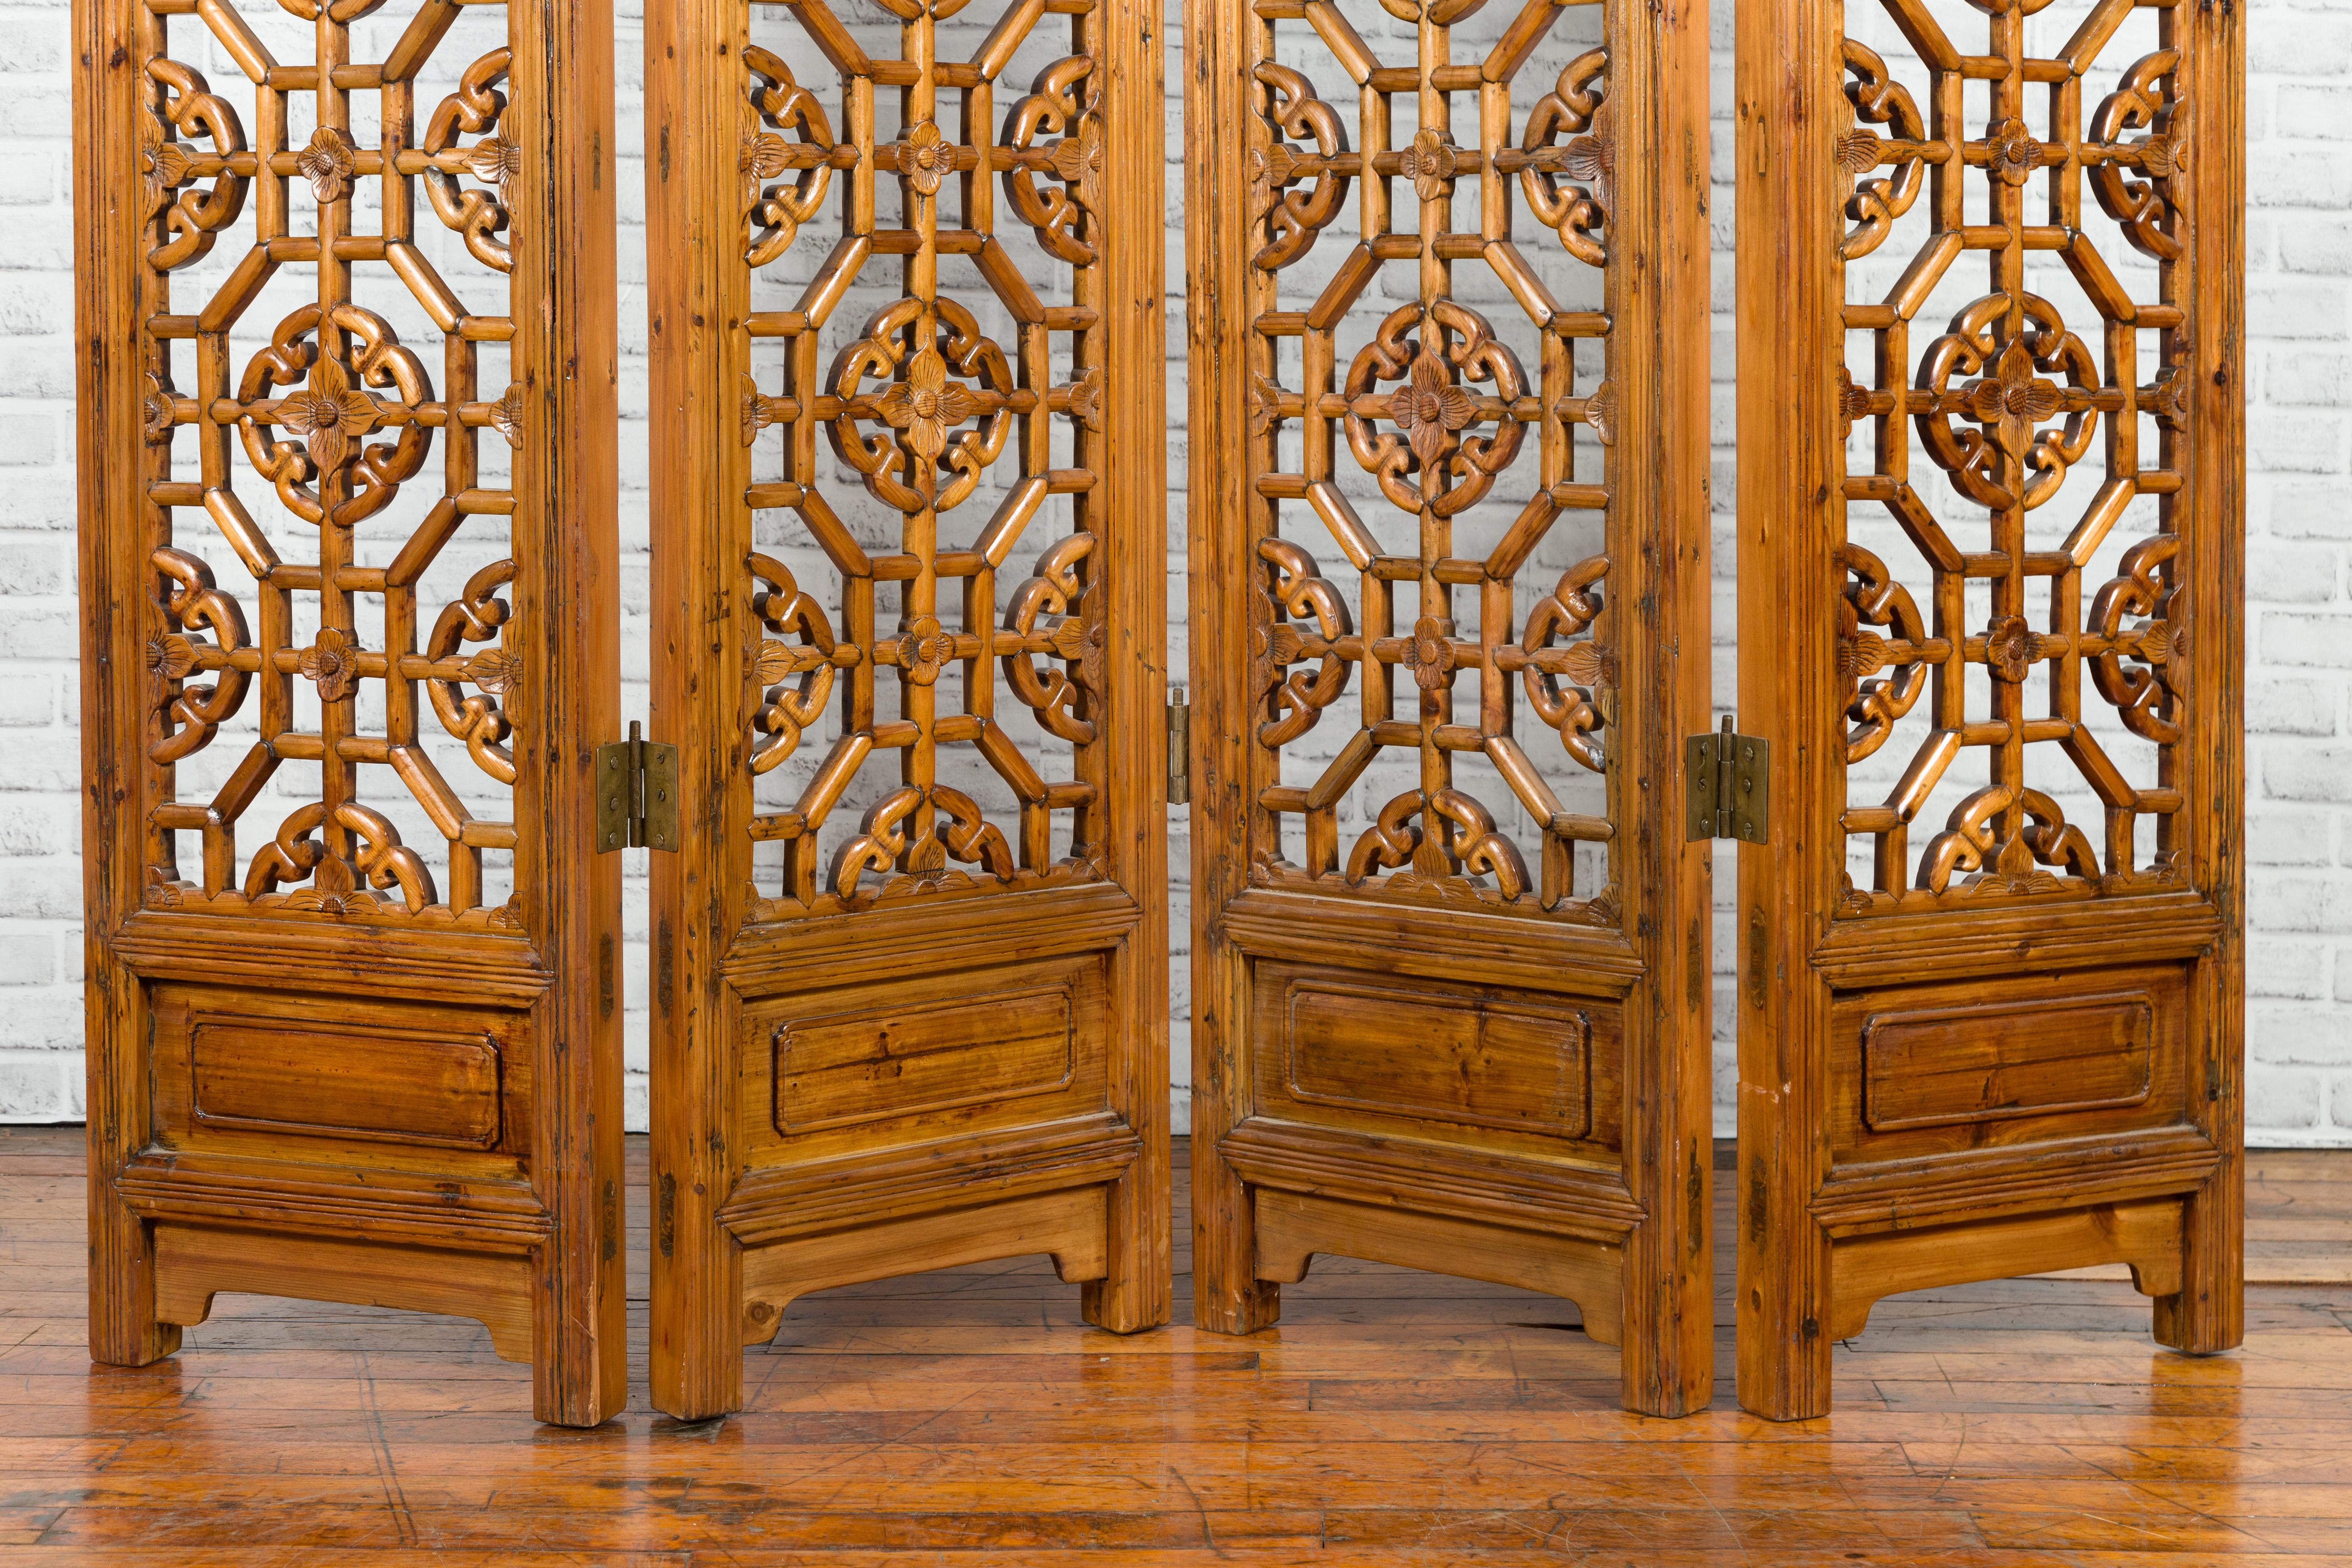 Wood Chinese Early 20th Century Fretwork Four-Panel Screen with Geometric Motifs For Sale